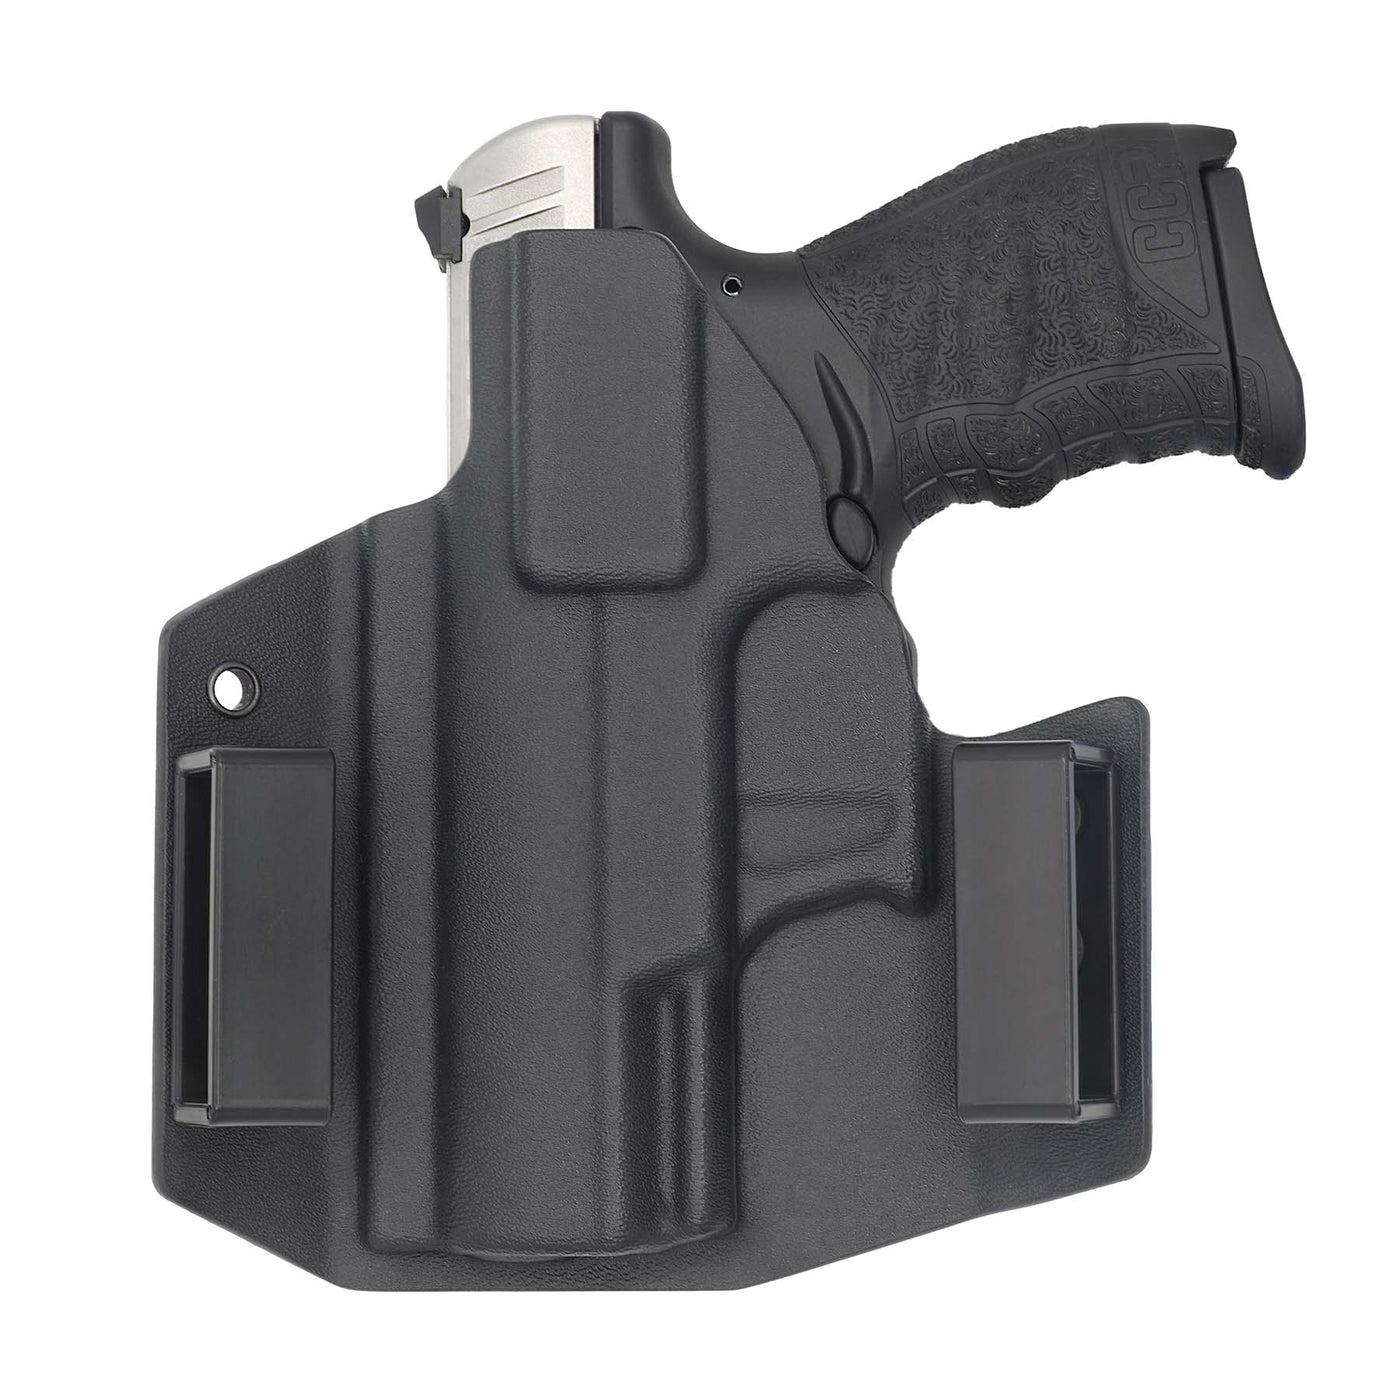 C&G Holsters OWB Outside the waistband Holster for the Walther CCP holstered rear view